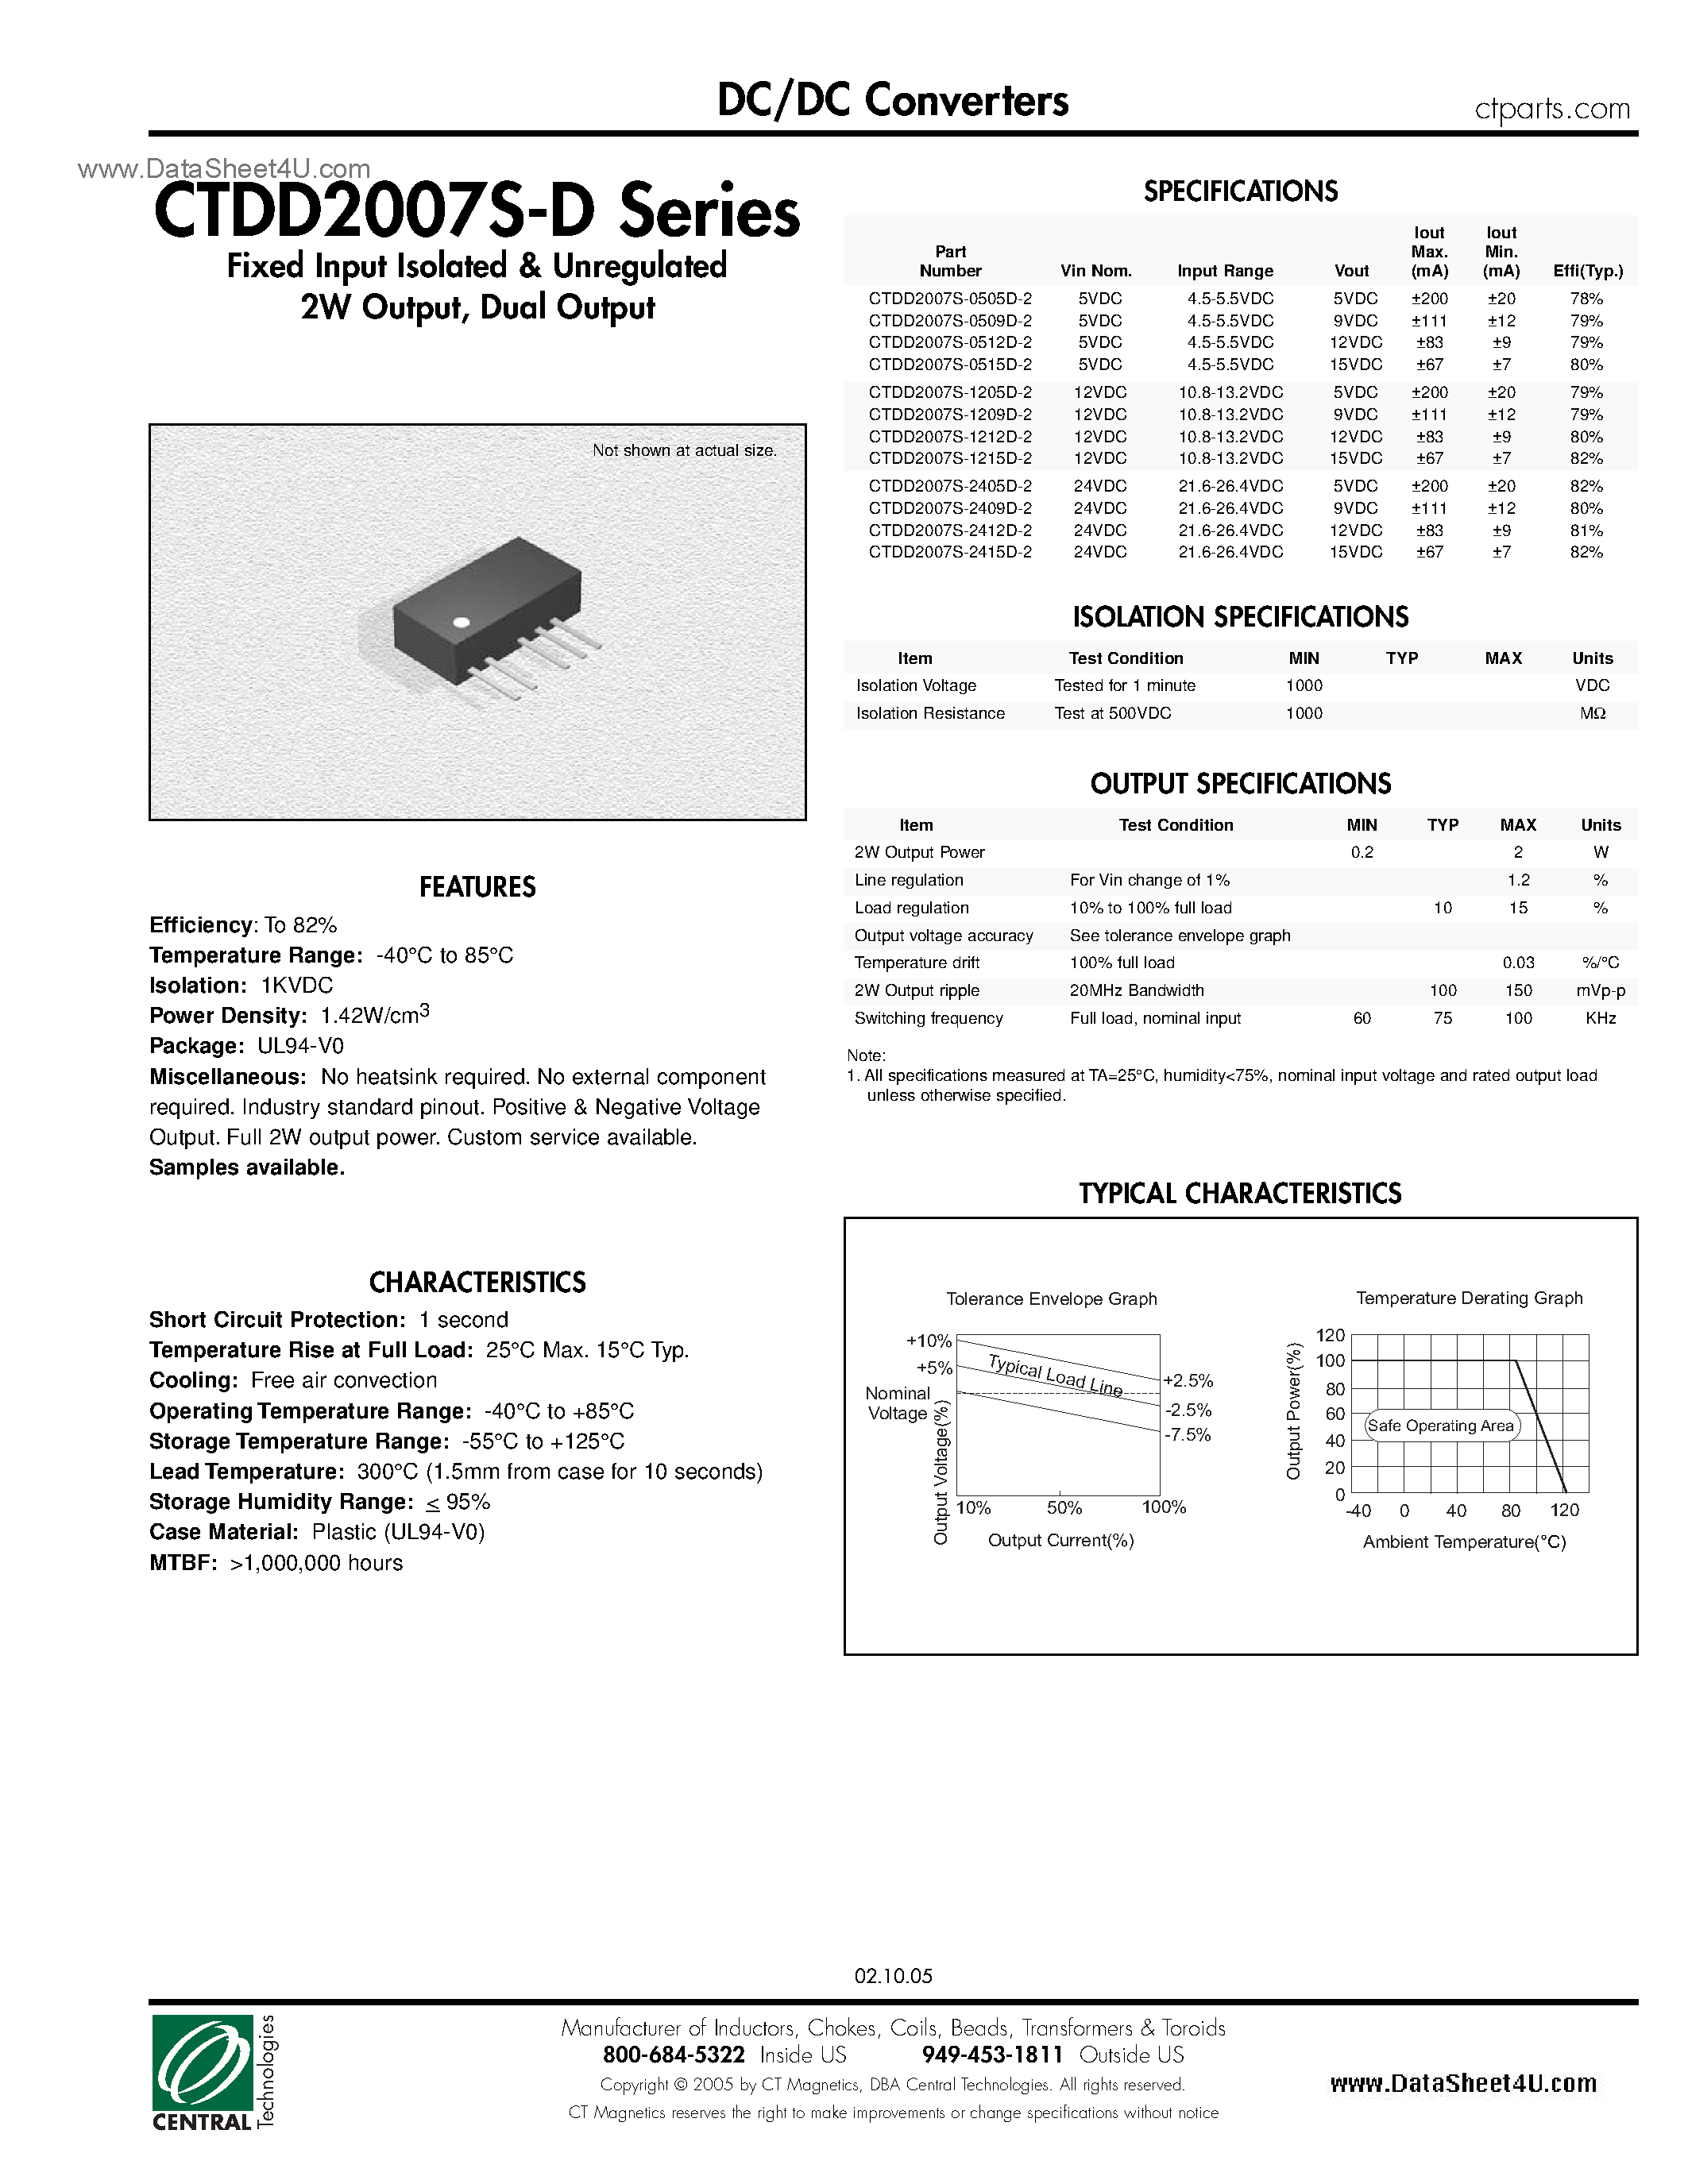 Datasheet CTDD2007S-D - DC/DC Converters page 1